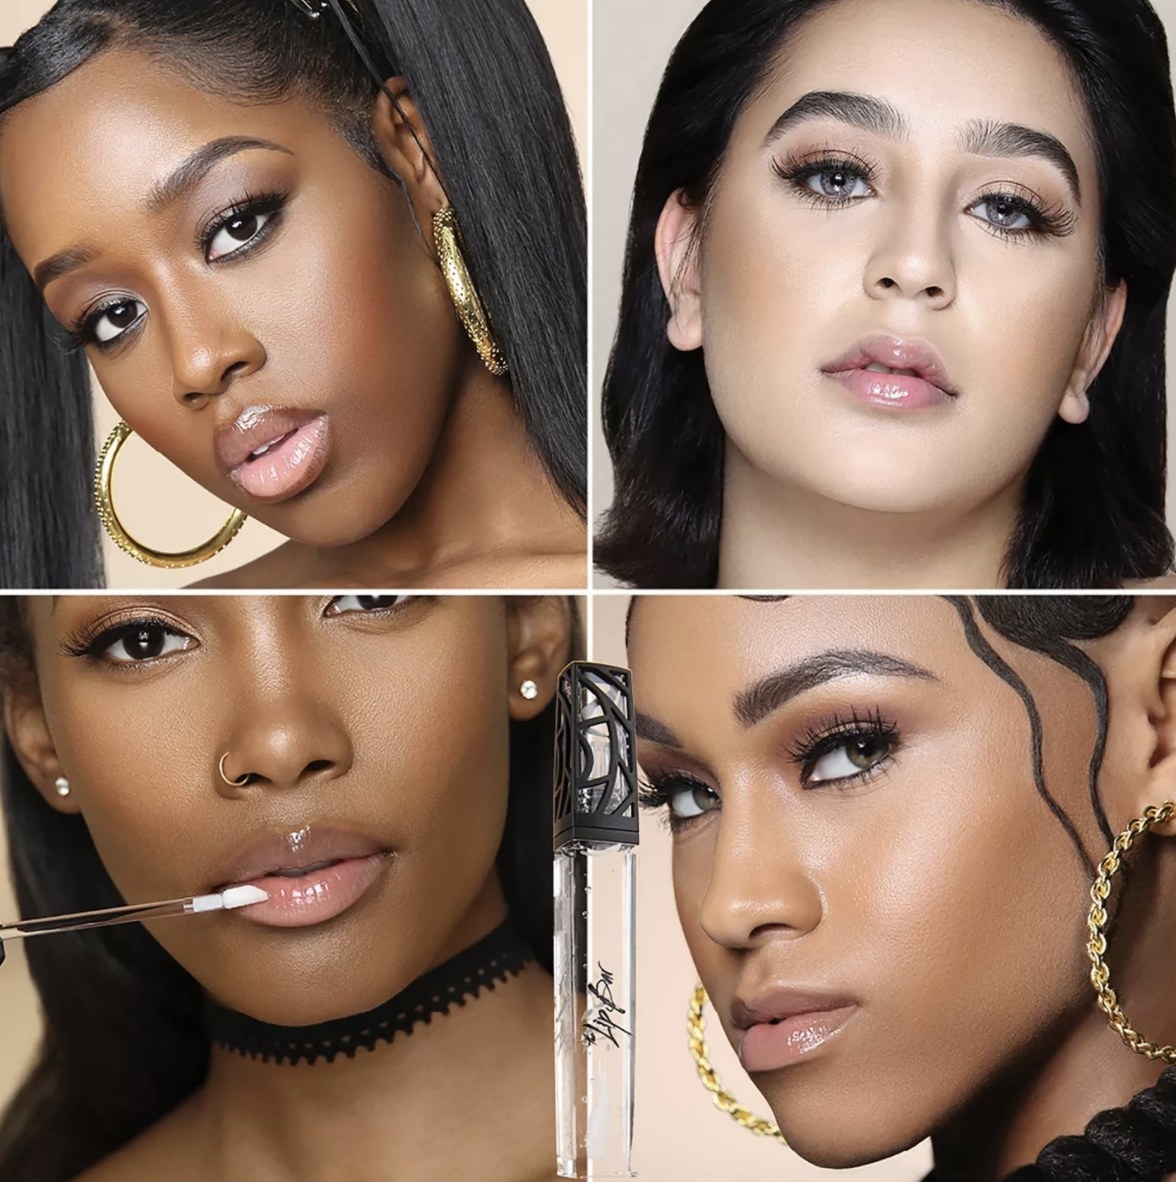 There are four adults who are all wearing the gloss and a clear tube that says &quot;The Lip Bar&quot; with a black intricate lid in the middle